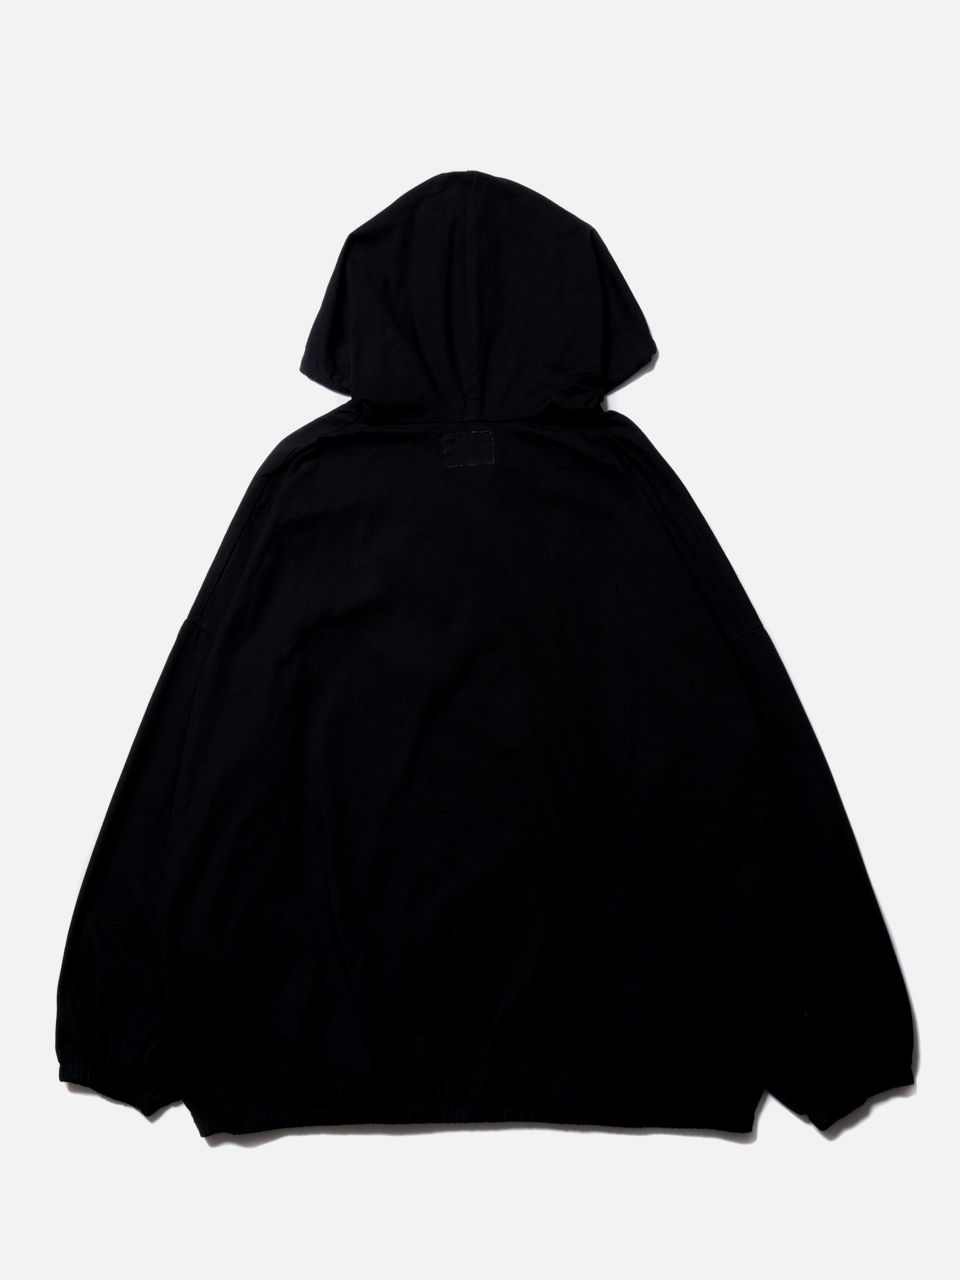 FIXER [フィクサー] - / COOTIE / Over Dyed Pullover Parka -Black-